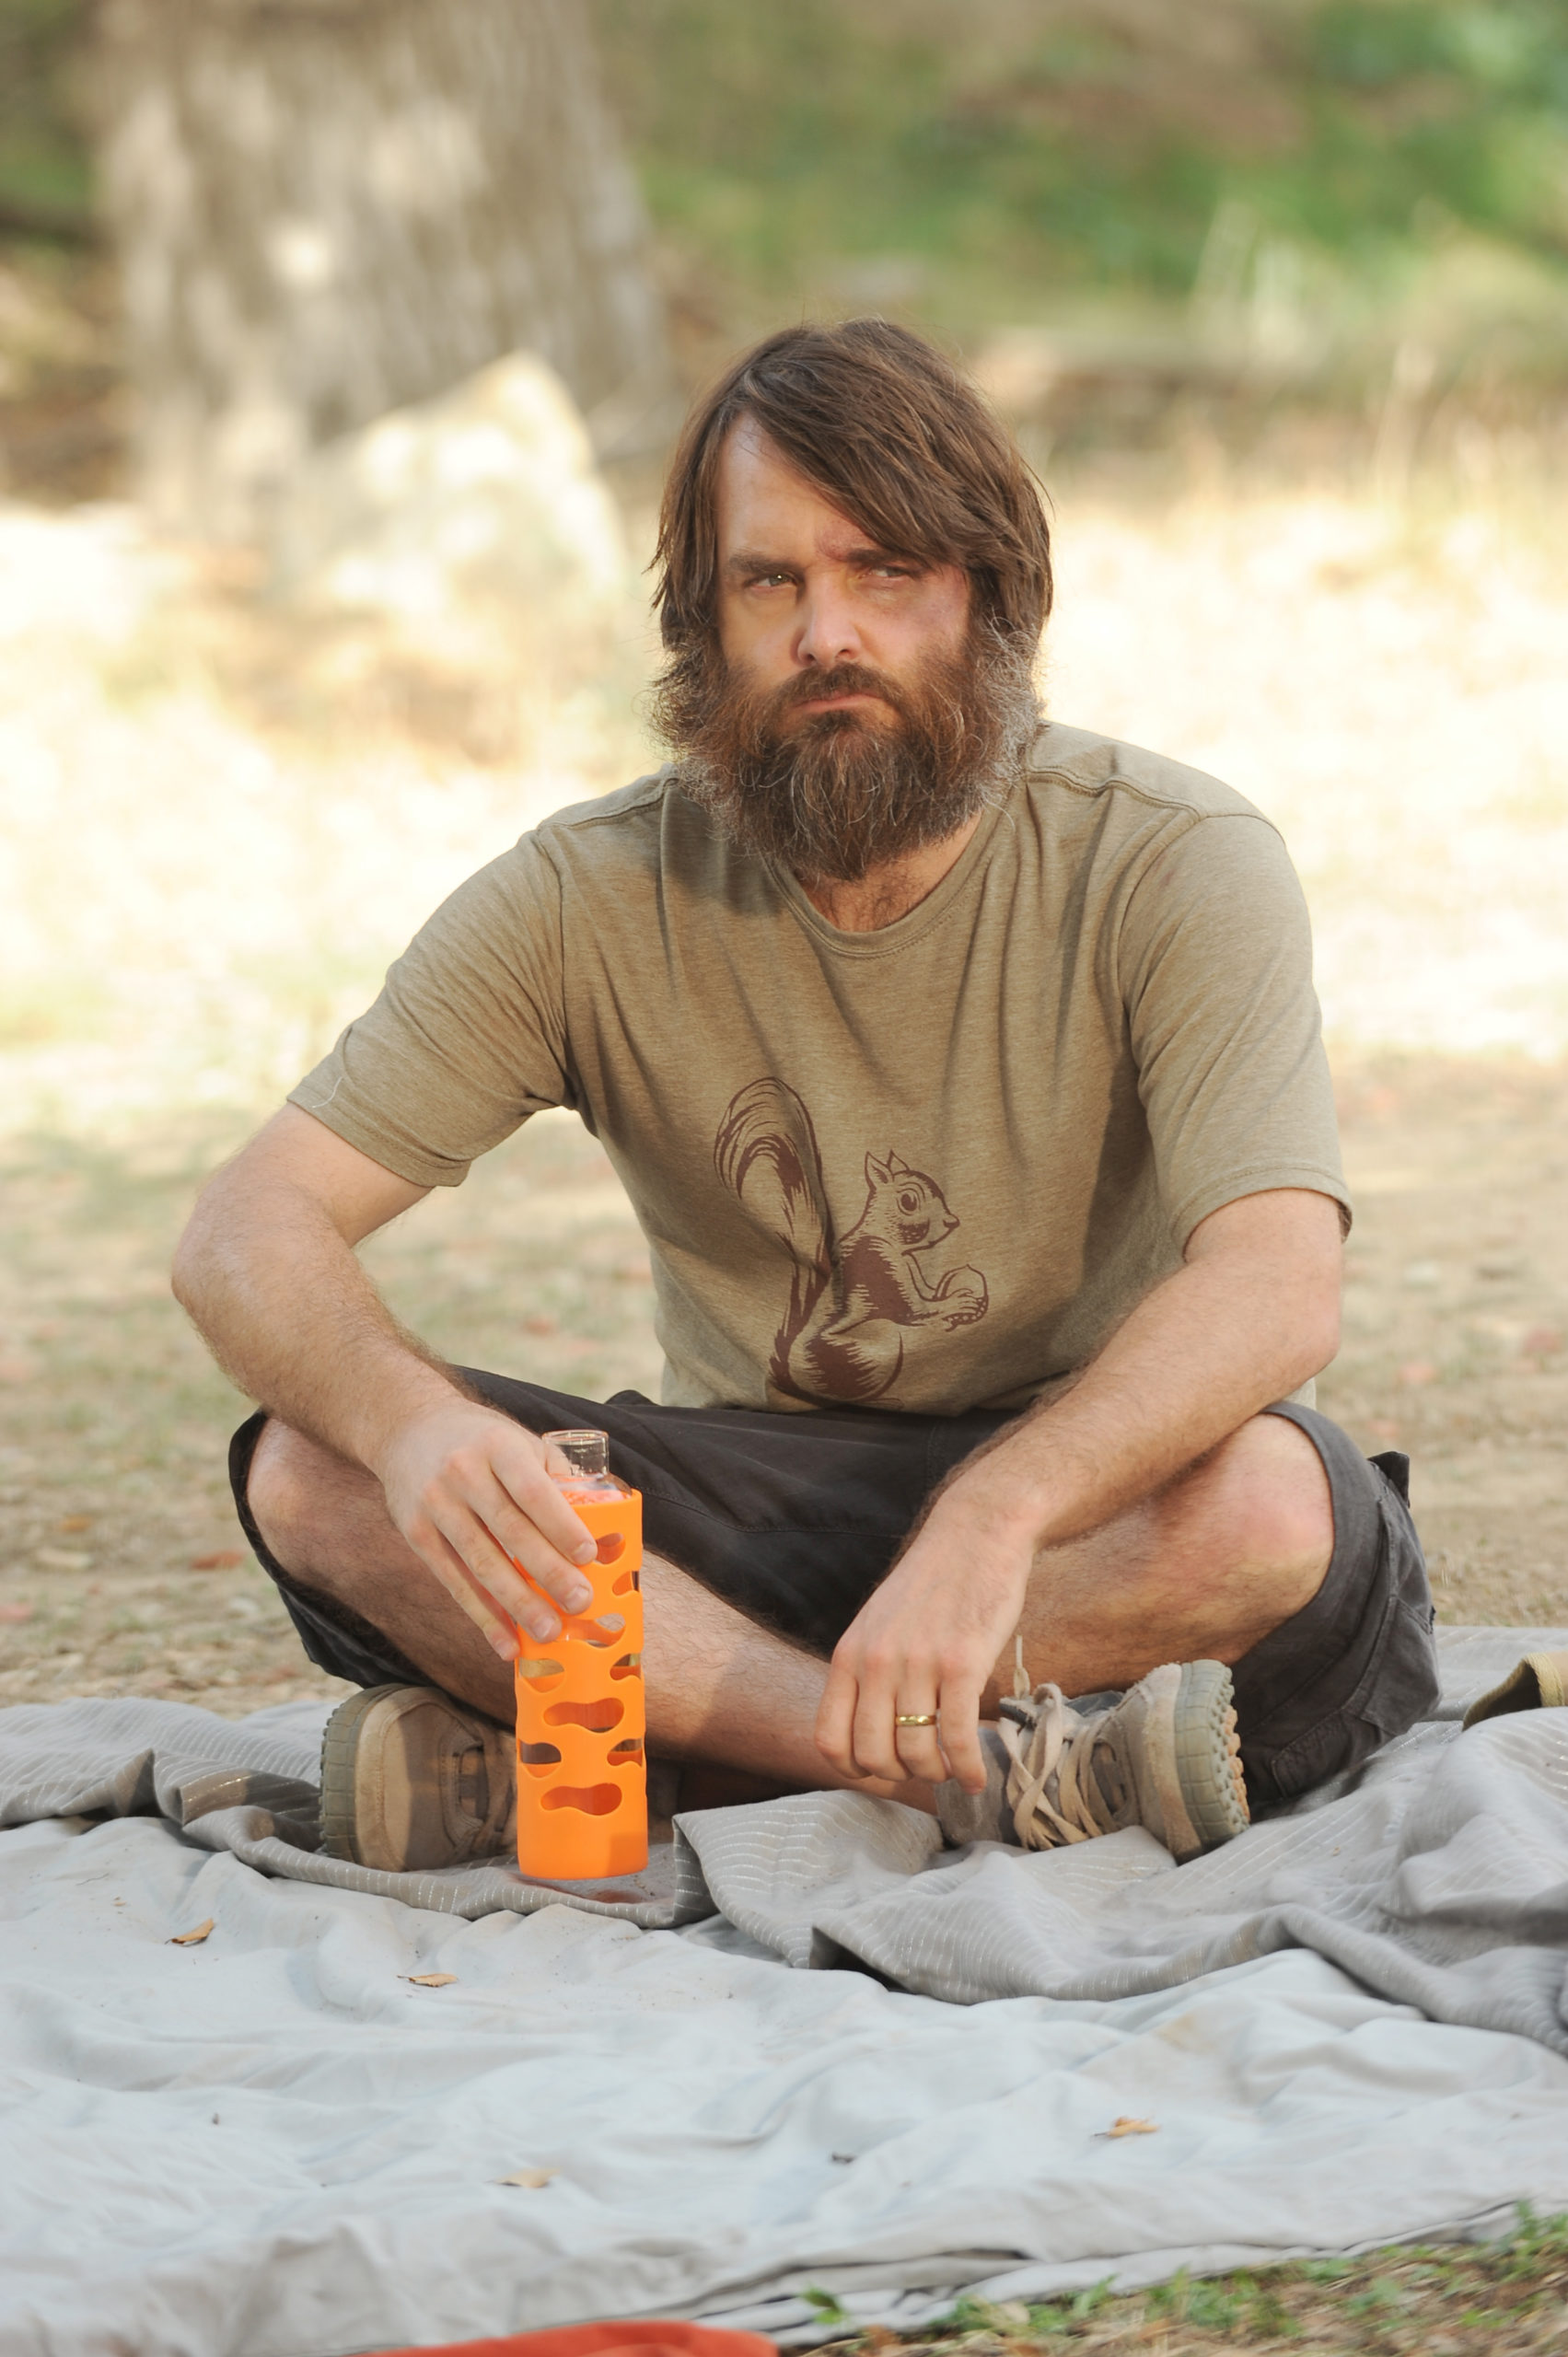 The Last Man on Earth - Will Forte - 'No Bull'